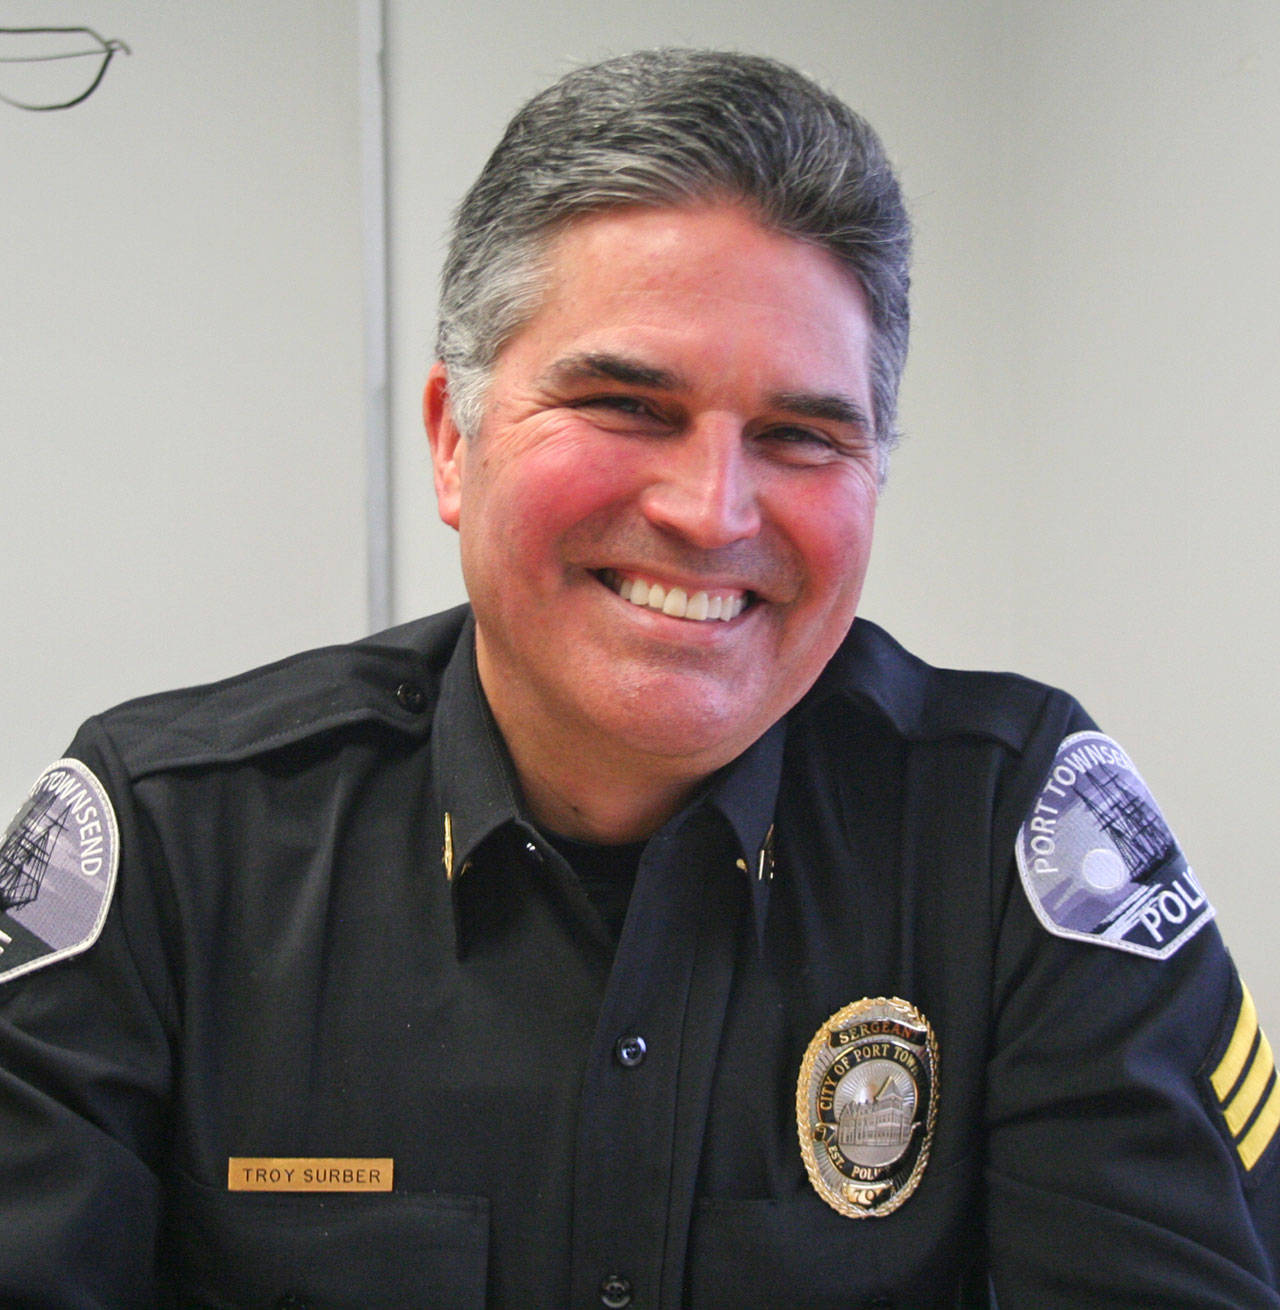 Troy Surber, who has served with the Port Townsend Police Department since 1997, was named interim chief Monday, March 2, 2020. He steps into the role following former chief Michael Evans’ retirement. (Brian McLean/Peninsula Daily News)